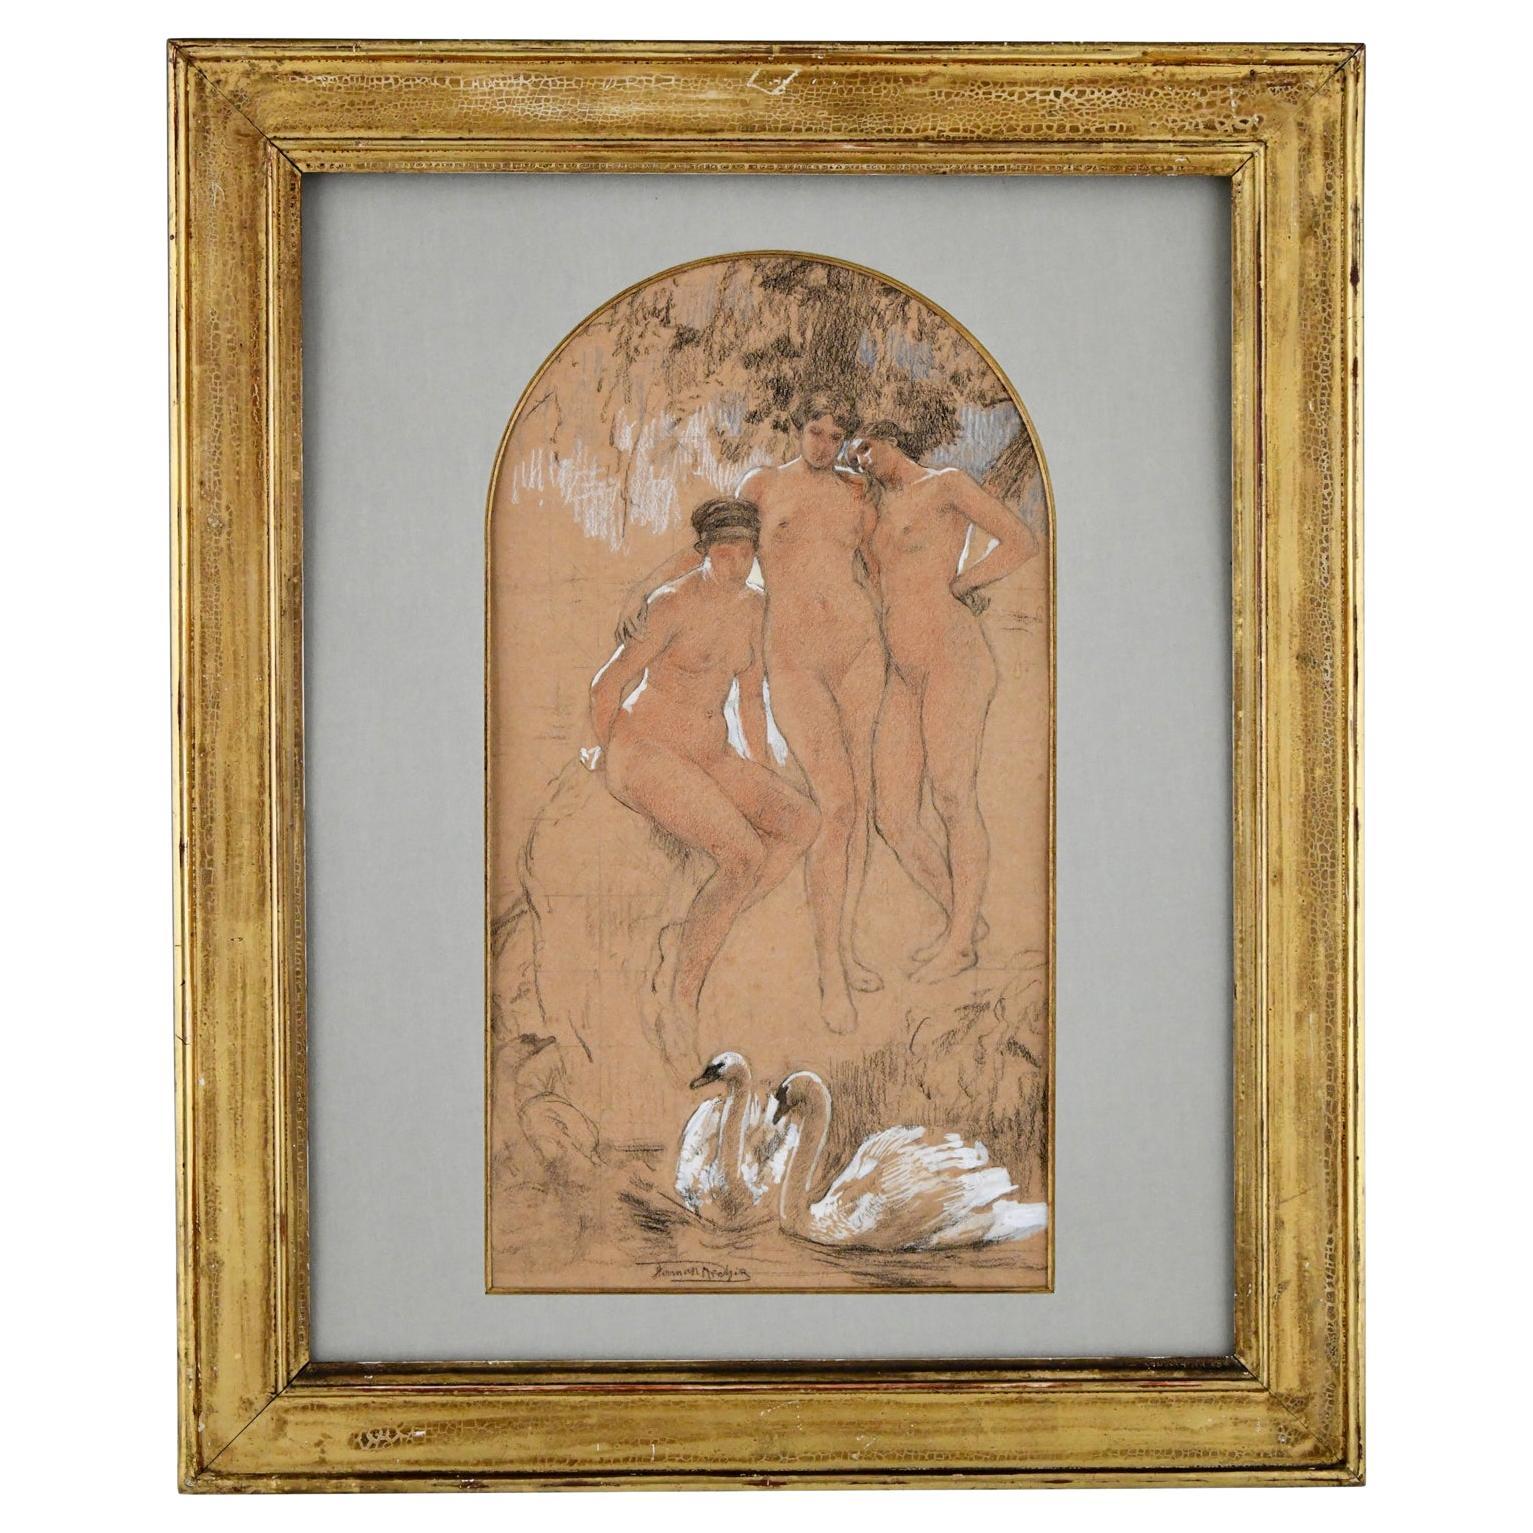 Art Nouveau gouache drawing three graces with swans signed by Herman Richir 1900